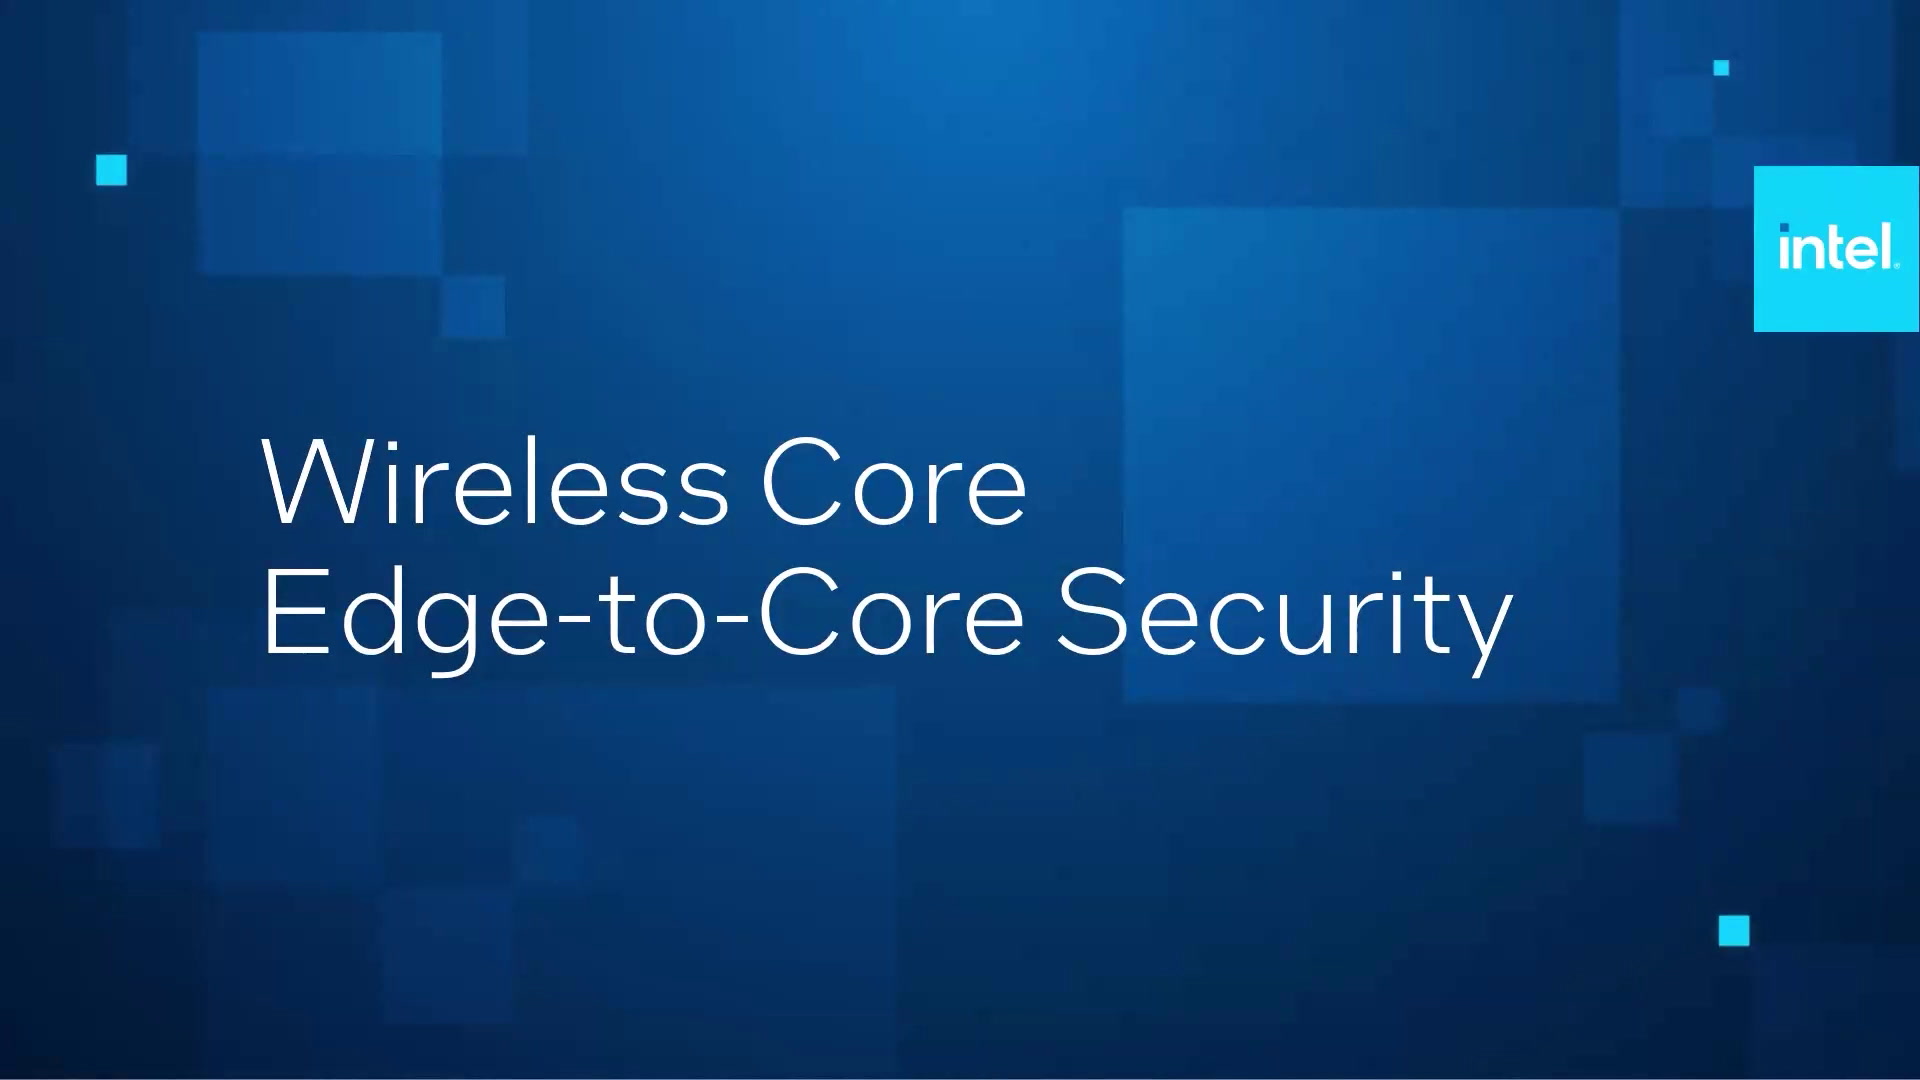 Chapter 1: The Evolution of Edge-to-Core Security for 5G